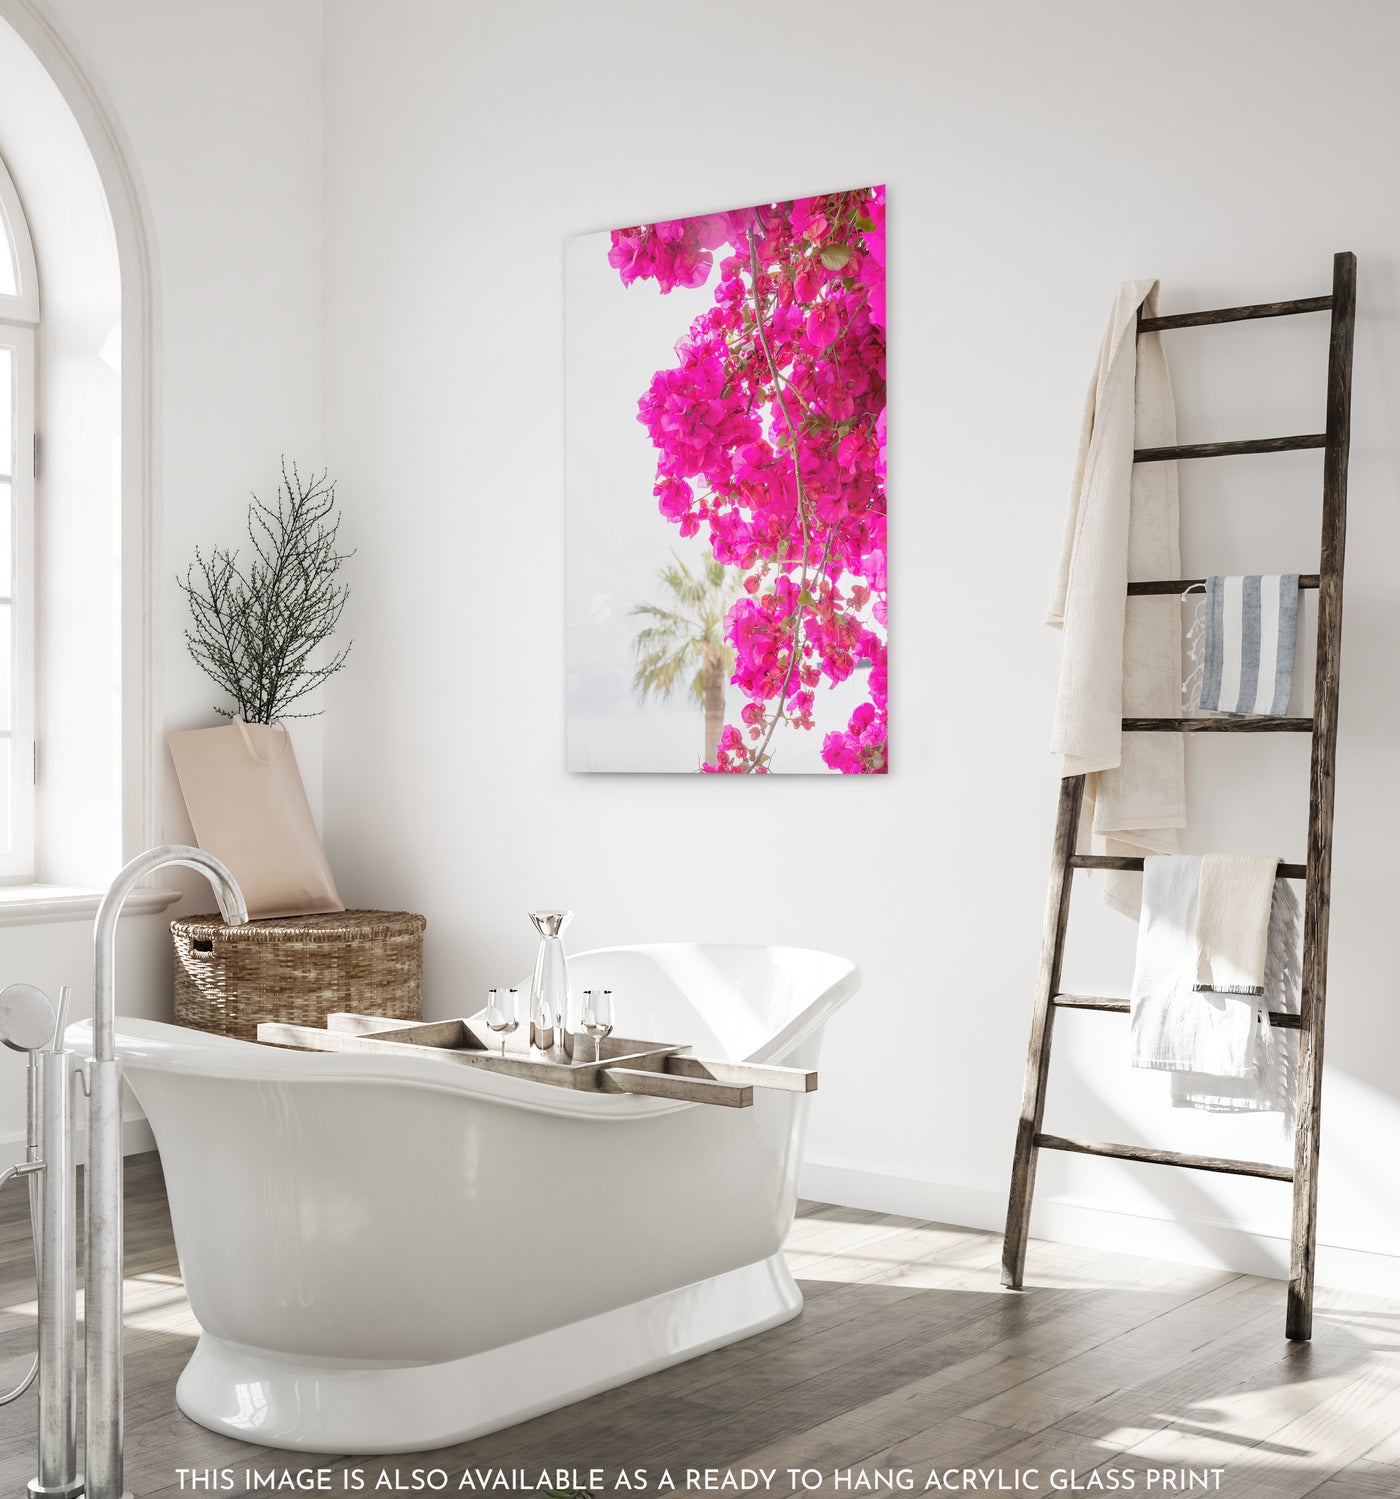 Bougainvillea and Palm Tree - Acrylic glass art print by Cattie Coyle Photography in bathroom